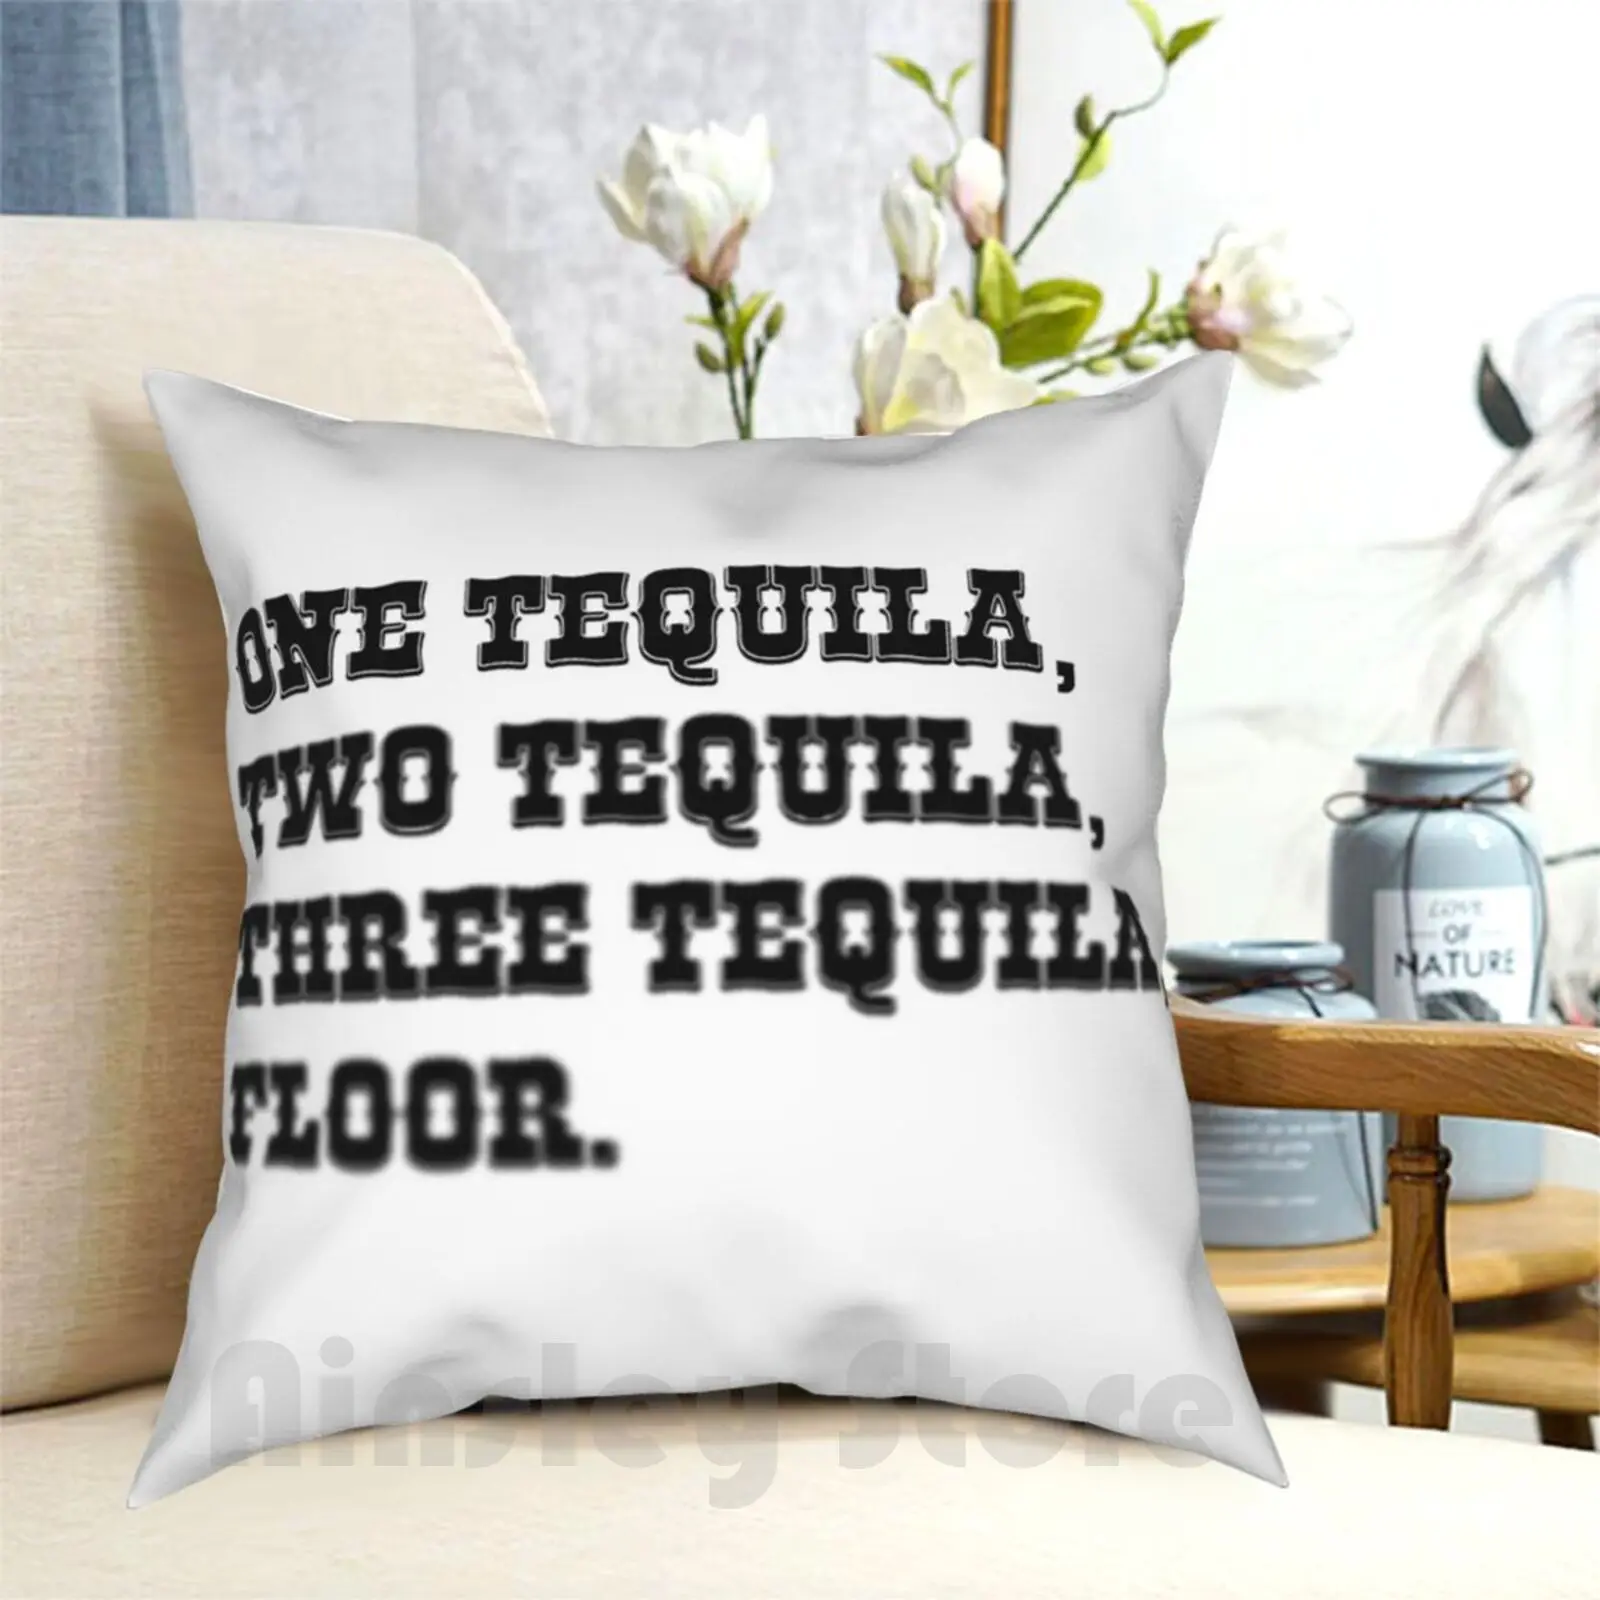 One Tequila , Two Tequila , Three Tequila , Floor. Pillow Case Printed Home Soft DIY Pillow cover One Tequila Two Tequila